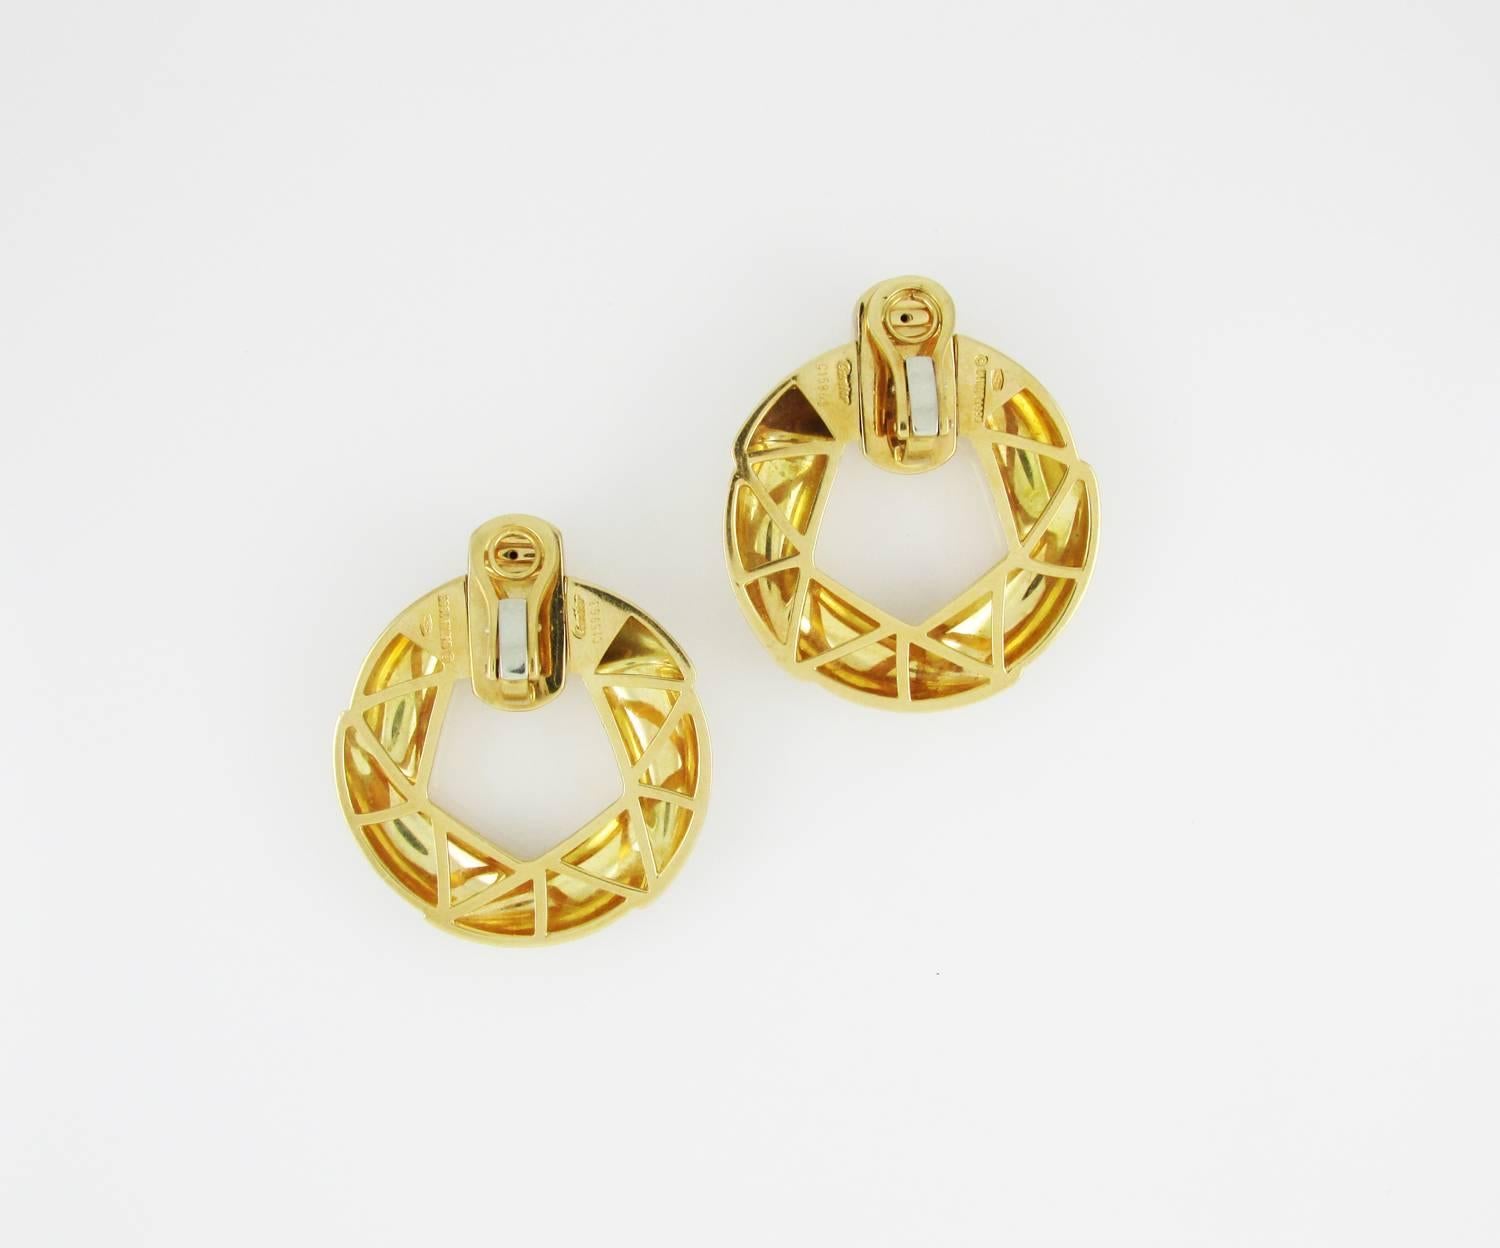 18KT polished yellow gold door knocker earrings. Signed Cartier, c1993, and numbered. Clip backs, no posts. 1.5 inches long, 1.25 inches wide.